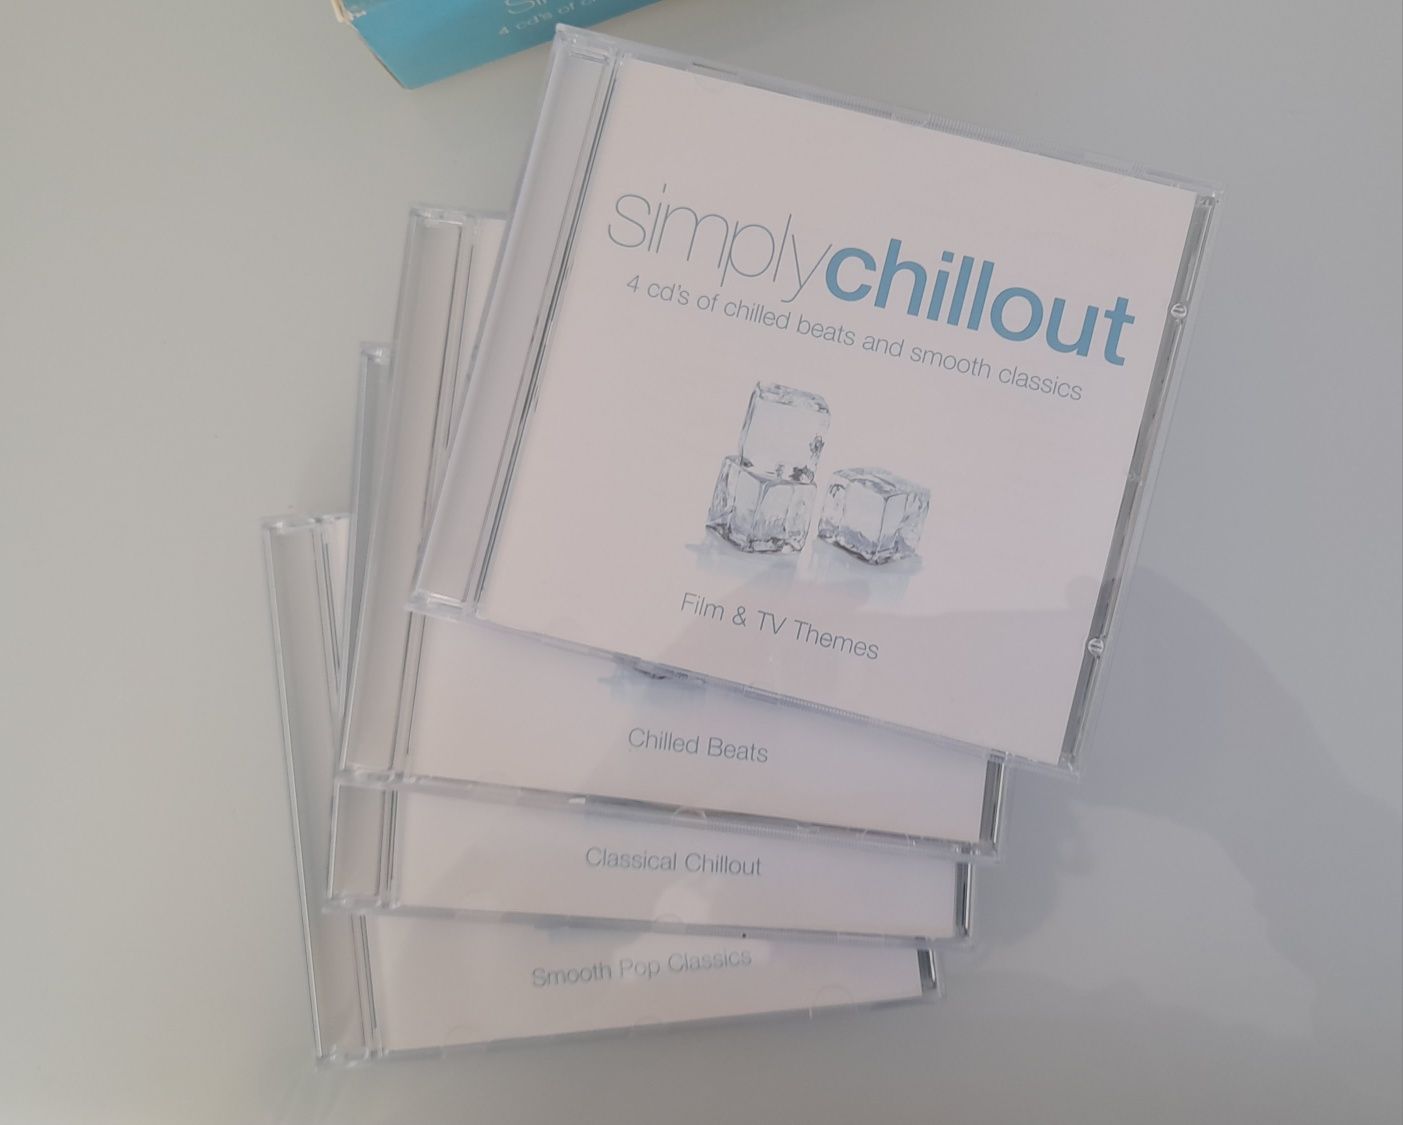 Cd Simply Chill Out 4 cds